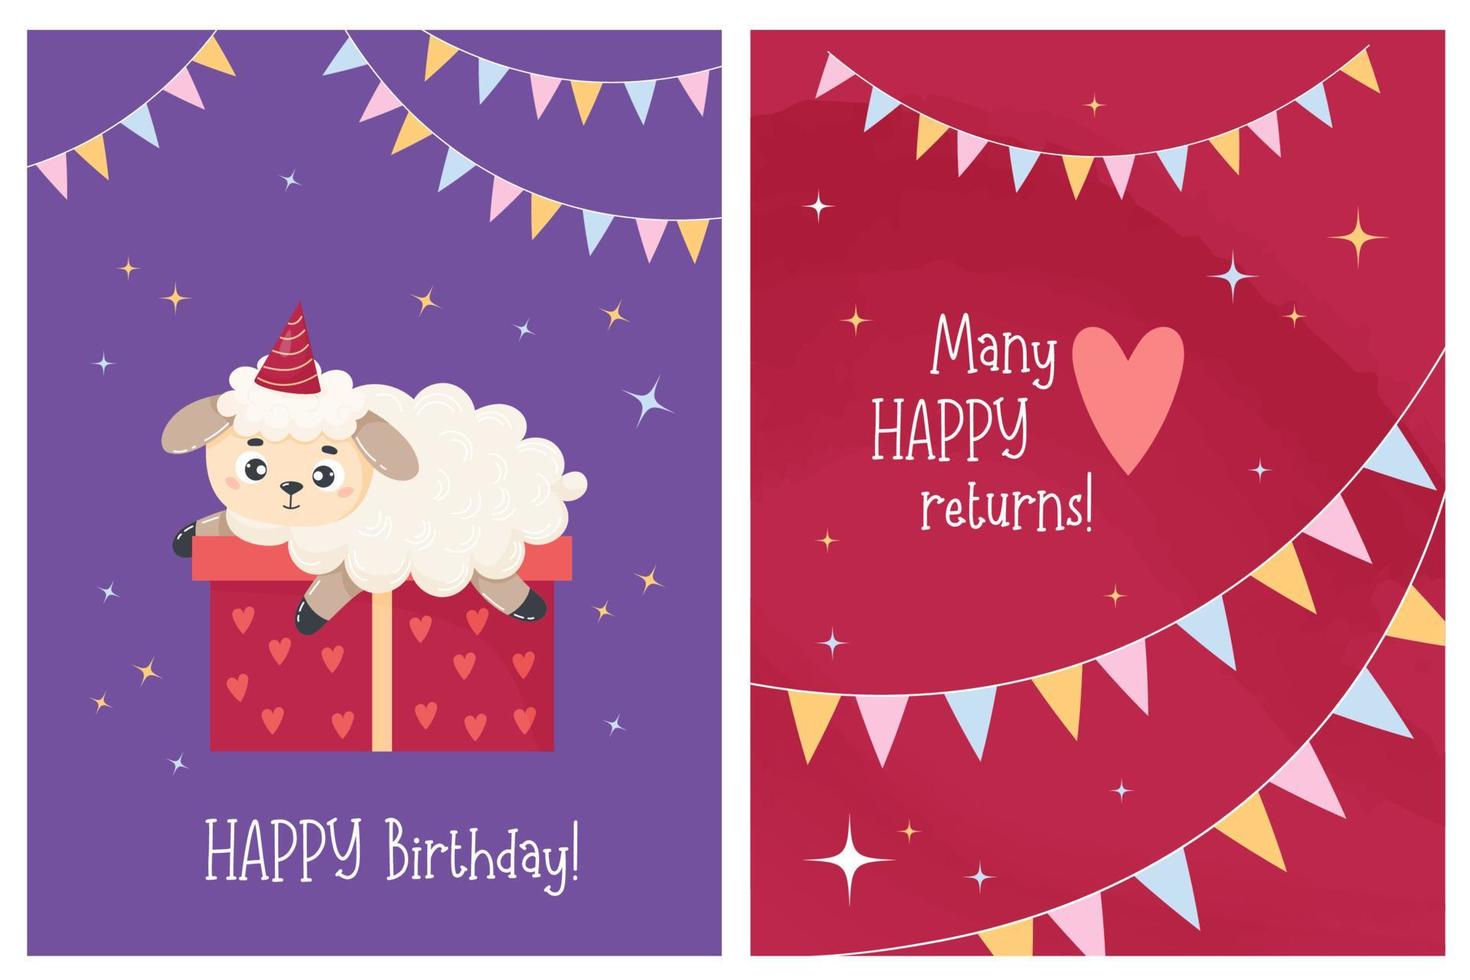 Cute sheep in birthday hat lies on gift box. Cool collection greeting vertical cards Happy birthday. Vector illustration in cartoon flat style.